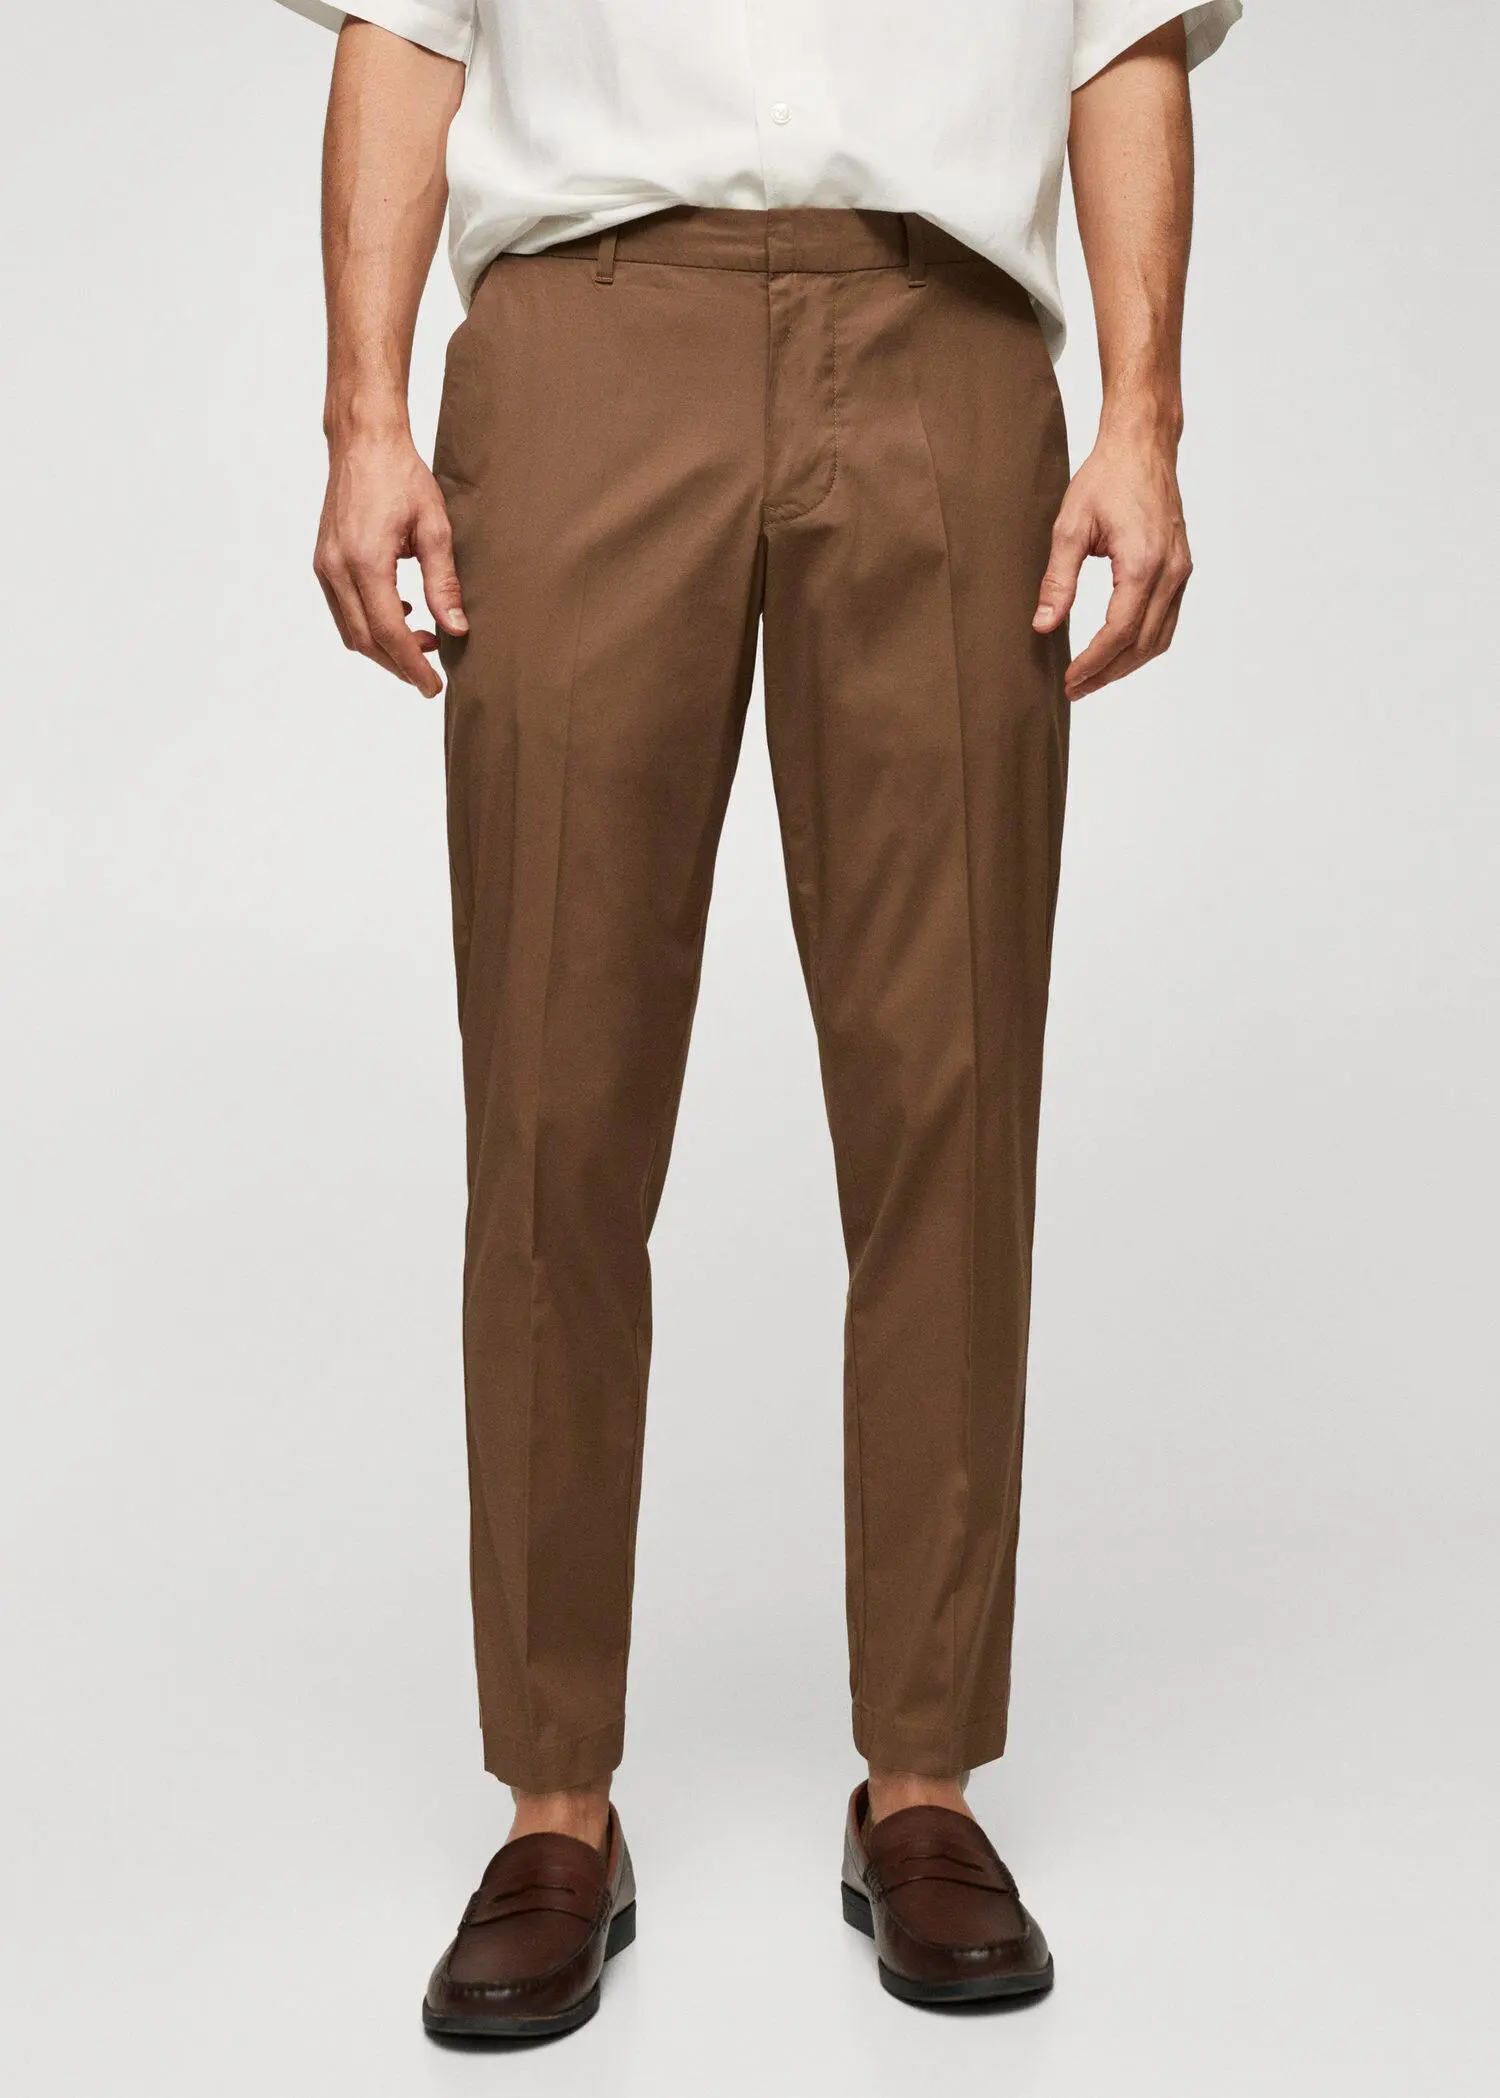 Mango Slim-fit cotton trousers. a man wearing brown pants standing in front of a white wall. 